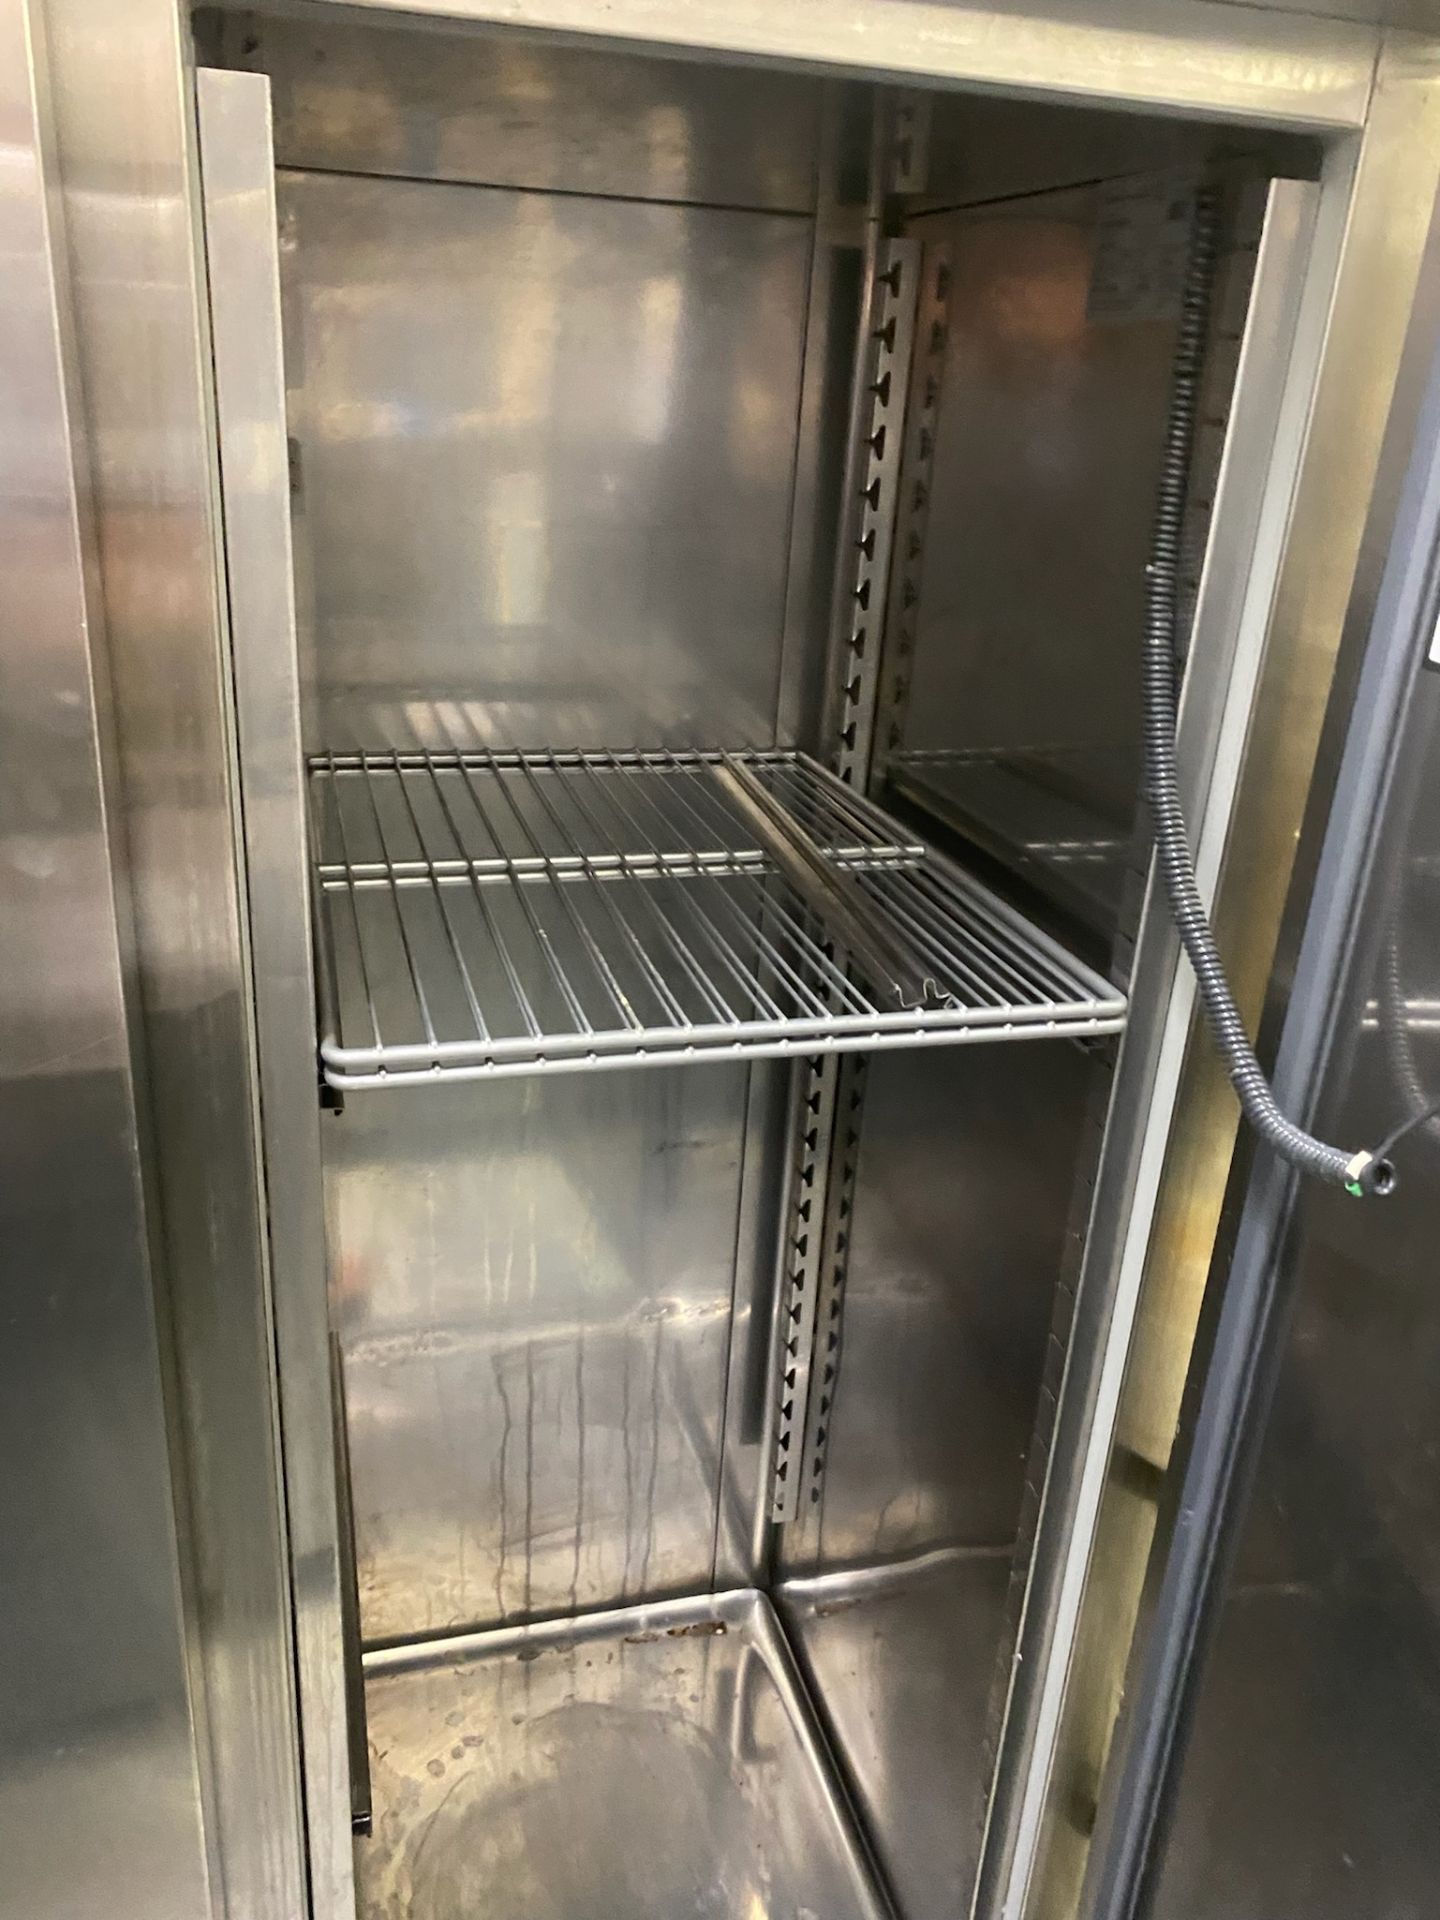 1 x Williams Stainless Steel Blast Chiller - Ref: BGC012 - CL807 - Covent Garden, LondonFrom a - Image 2 of 2